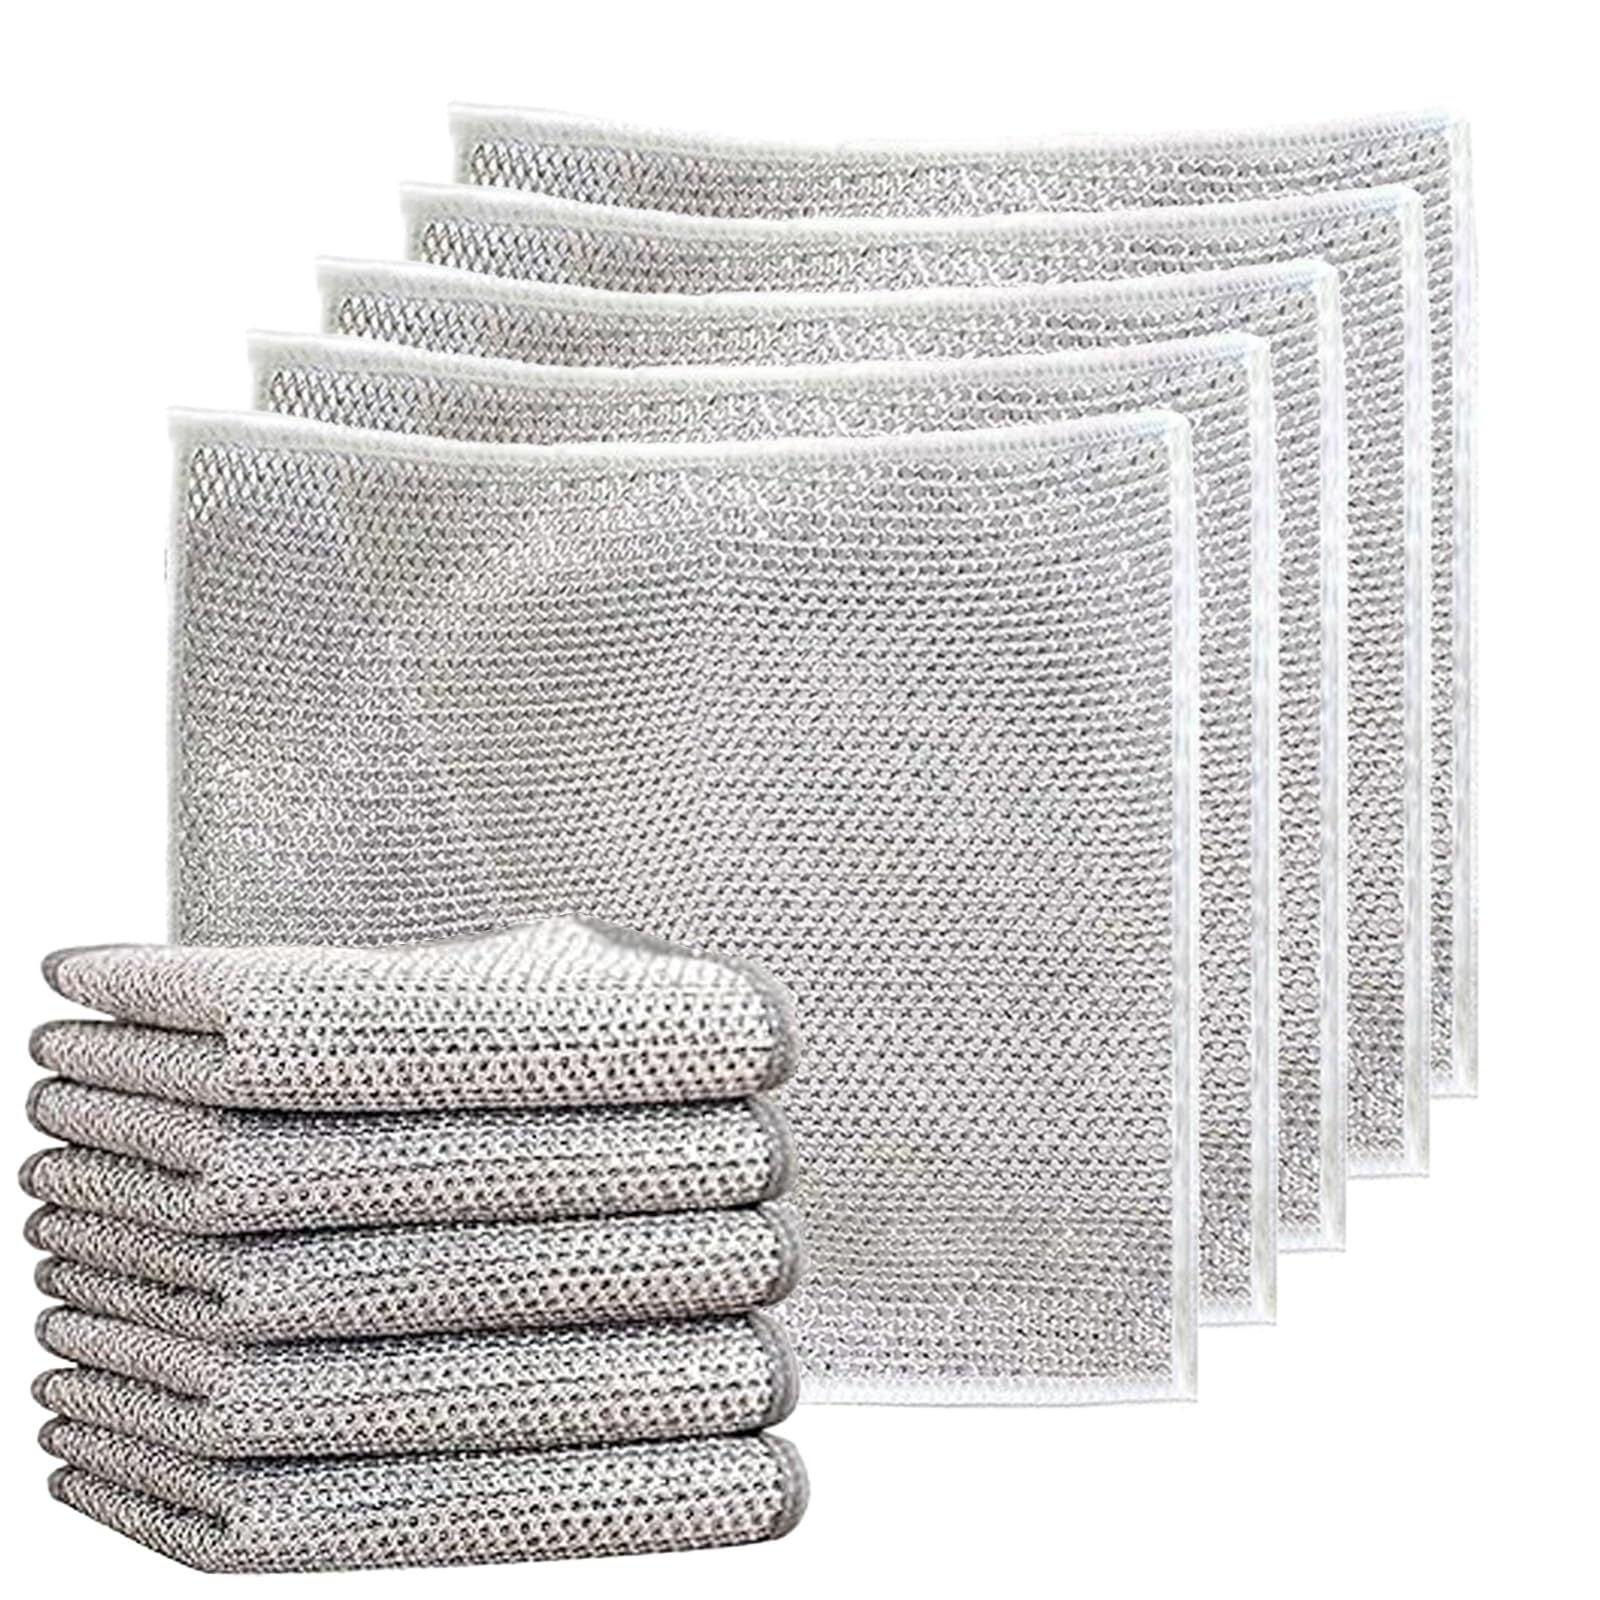 Cheap Non-Scratch Wire Dishcloth, Dishwashing Rags for Wet and Dry, Easy  Rinsing, Reusable,for Kitchen Cleaning for Dishes, Sinks, Stove Tops